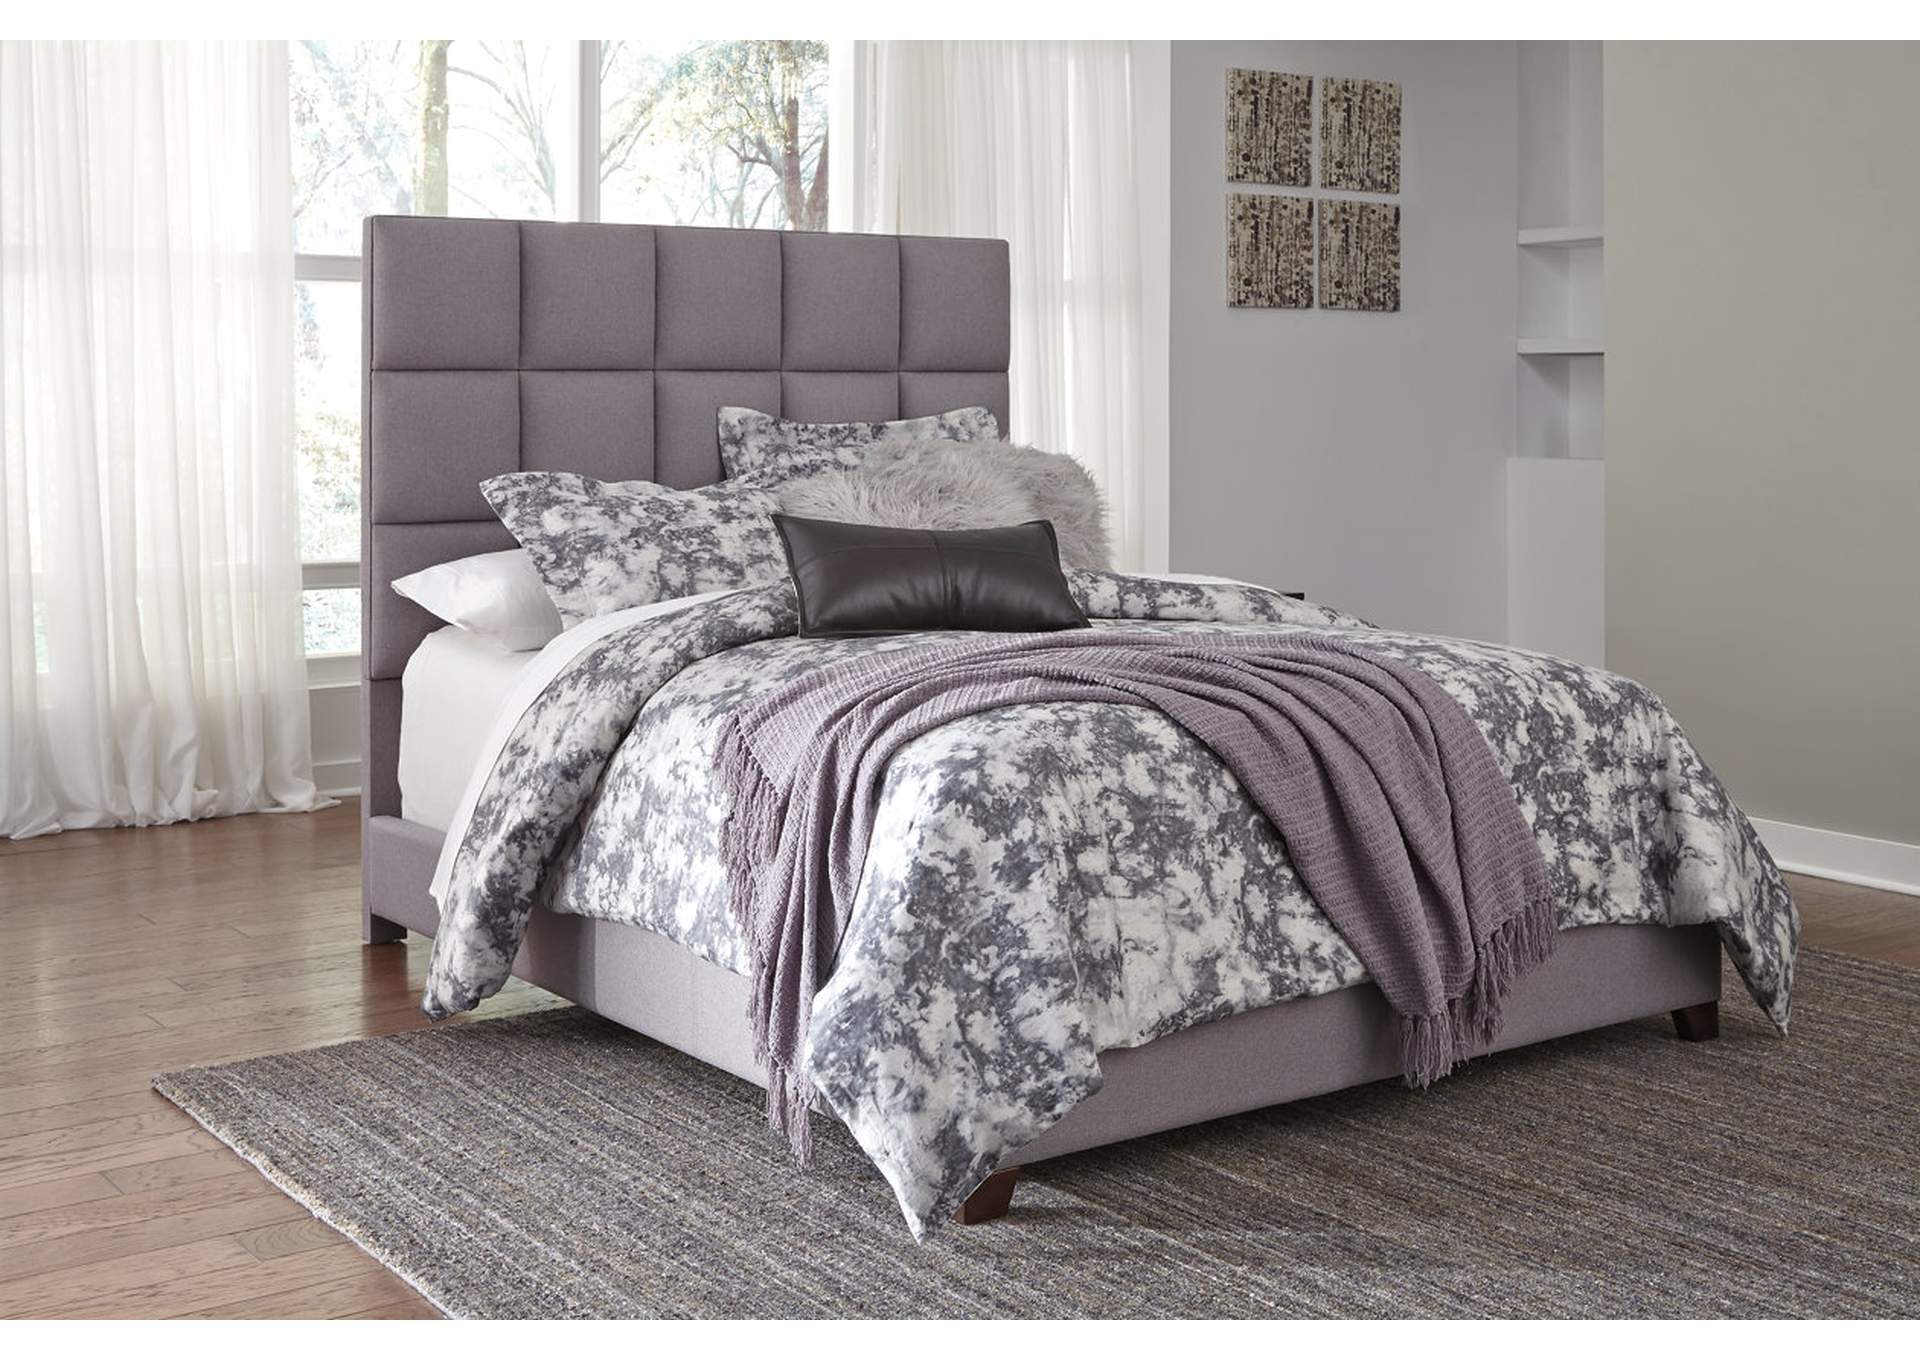 Dolante Queen Upholstered Bed,Direct To Consumer Express